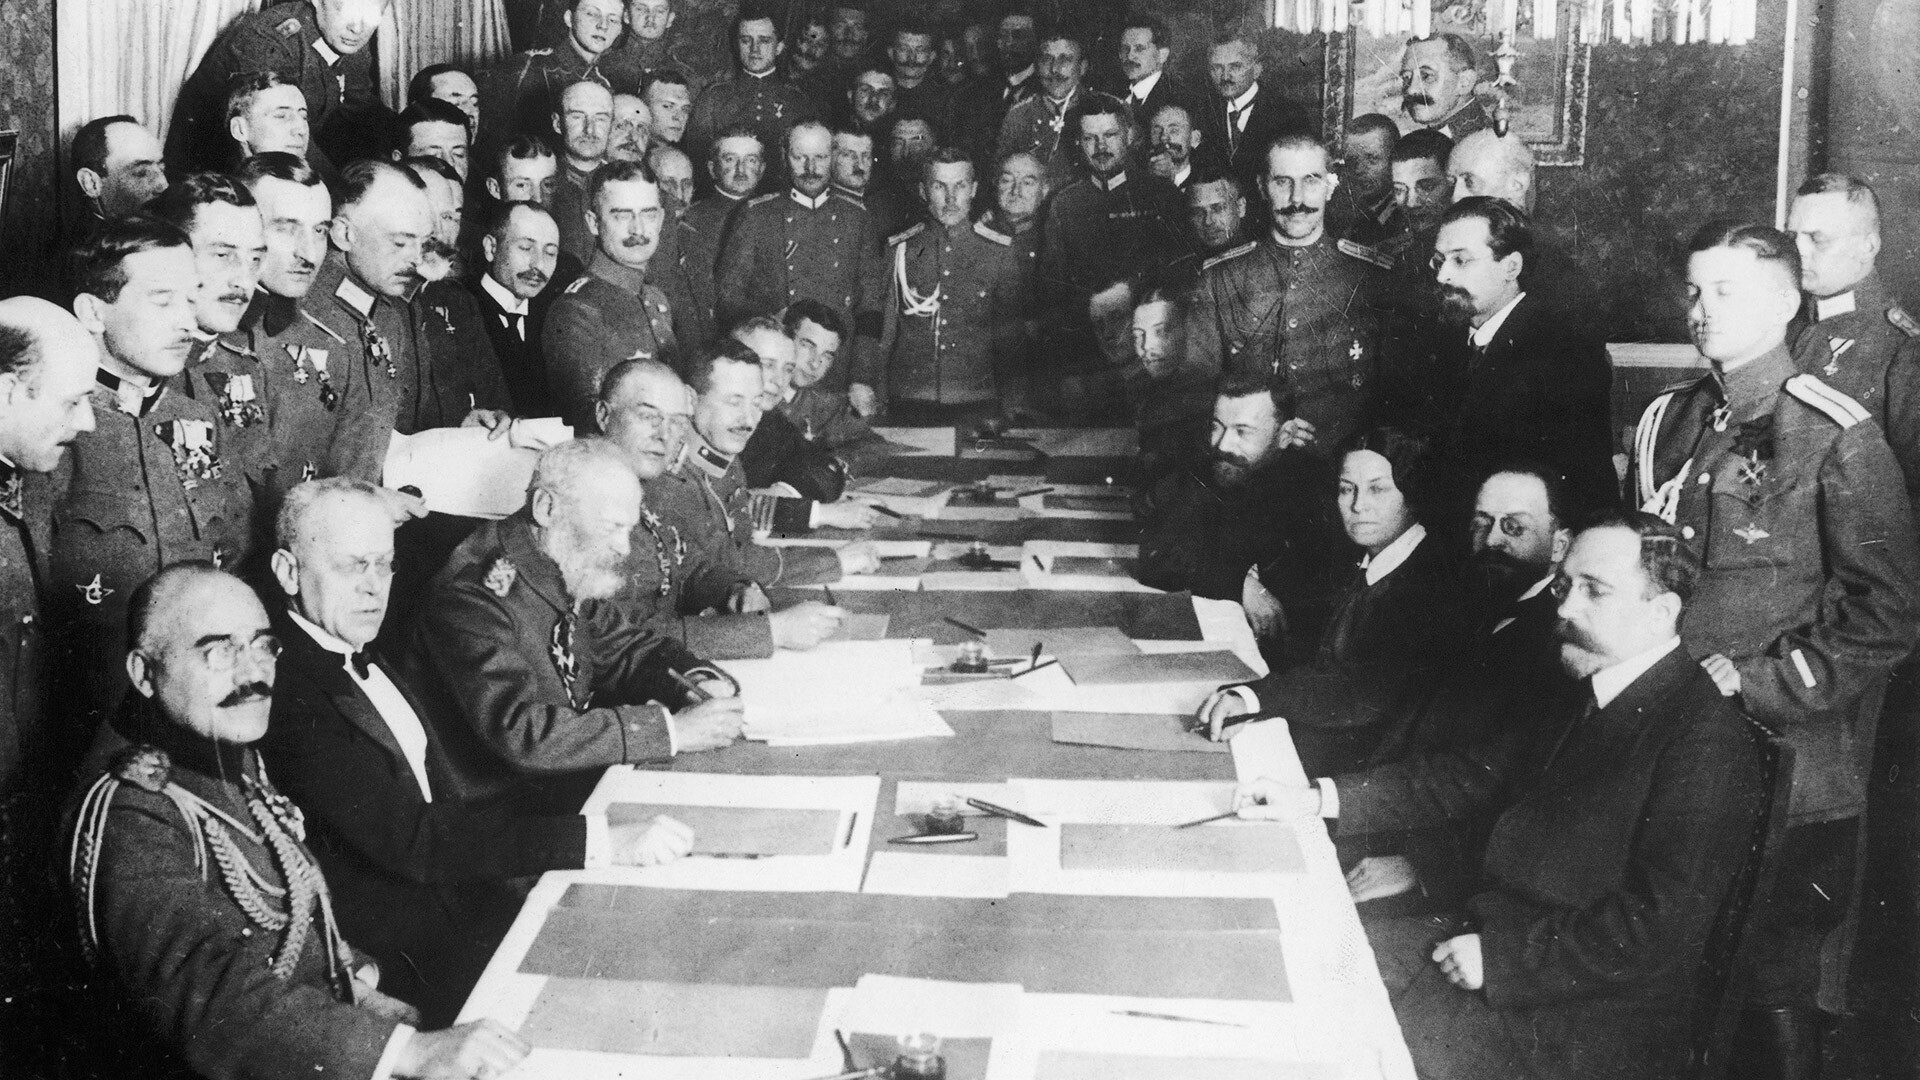 Signing of the peace treaty of Brest-Litovsk.